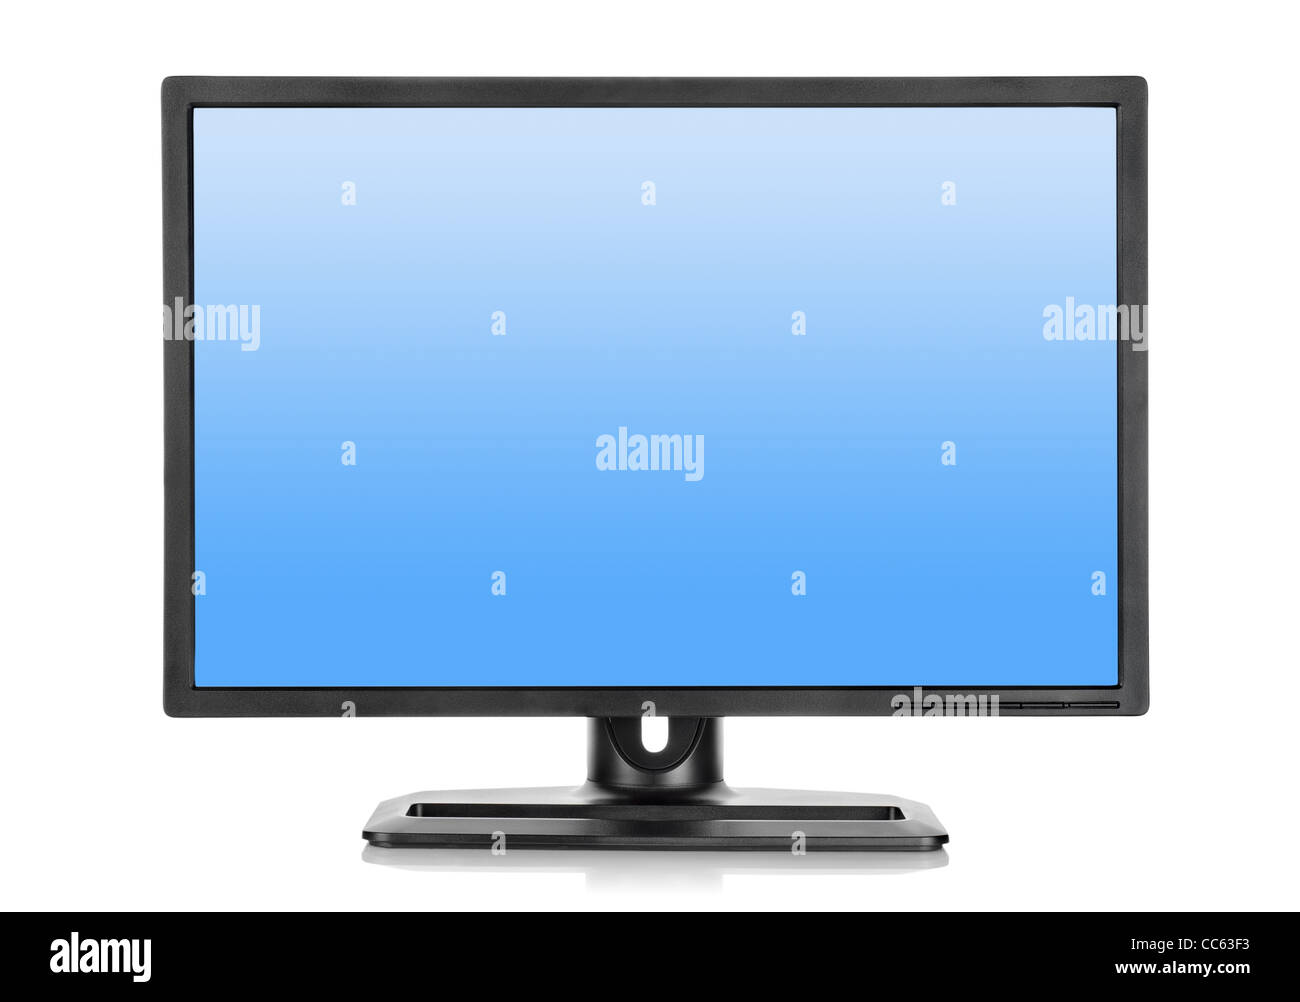 Liquid-crystal display isolated on a white background Stock Photo